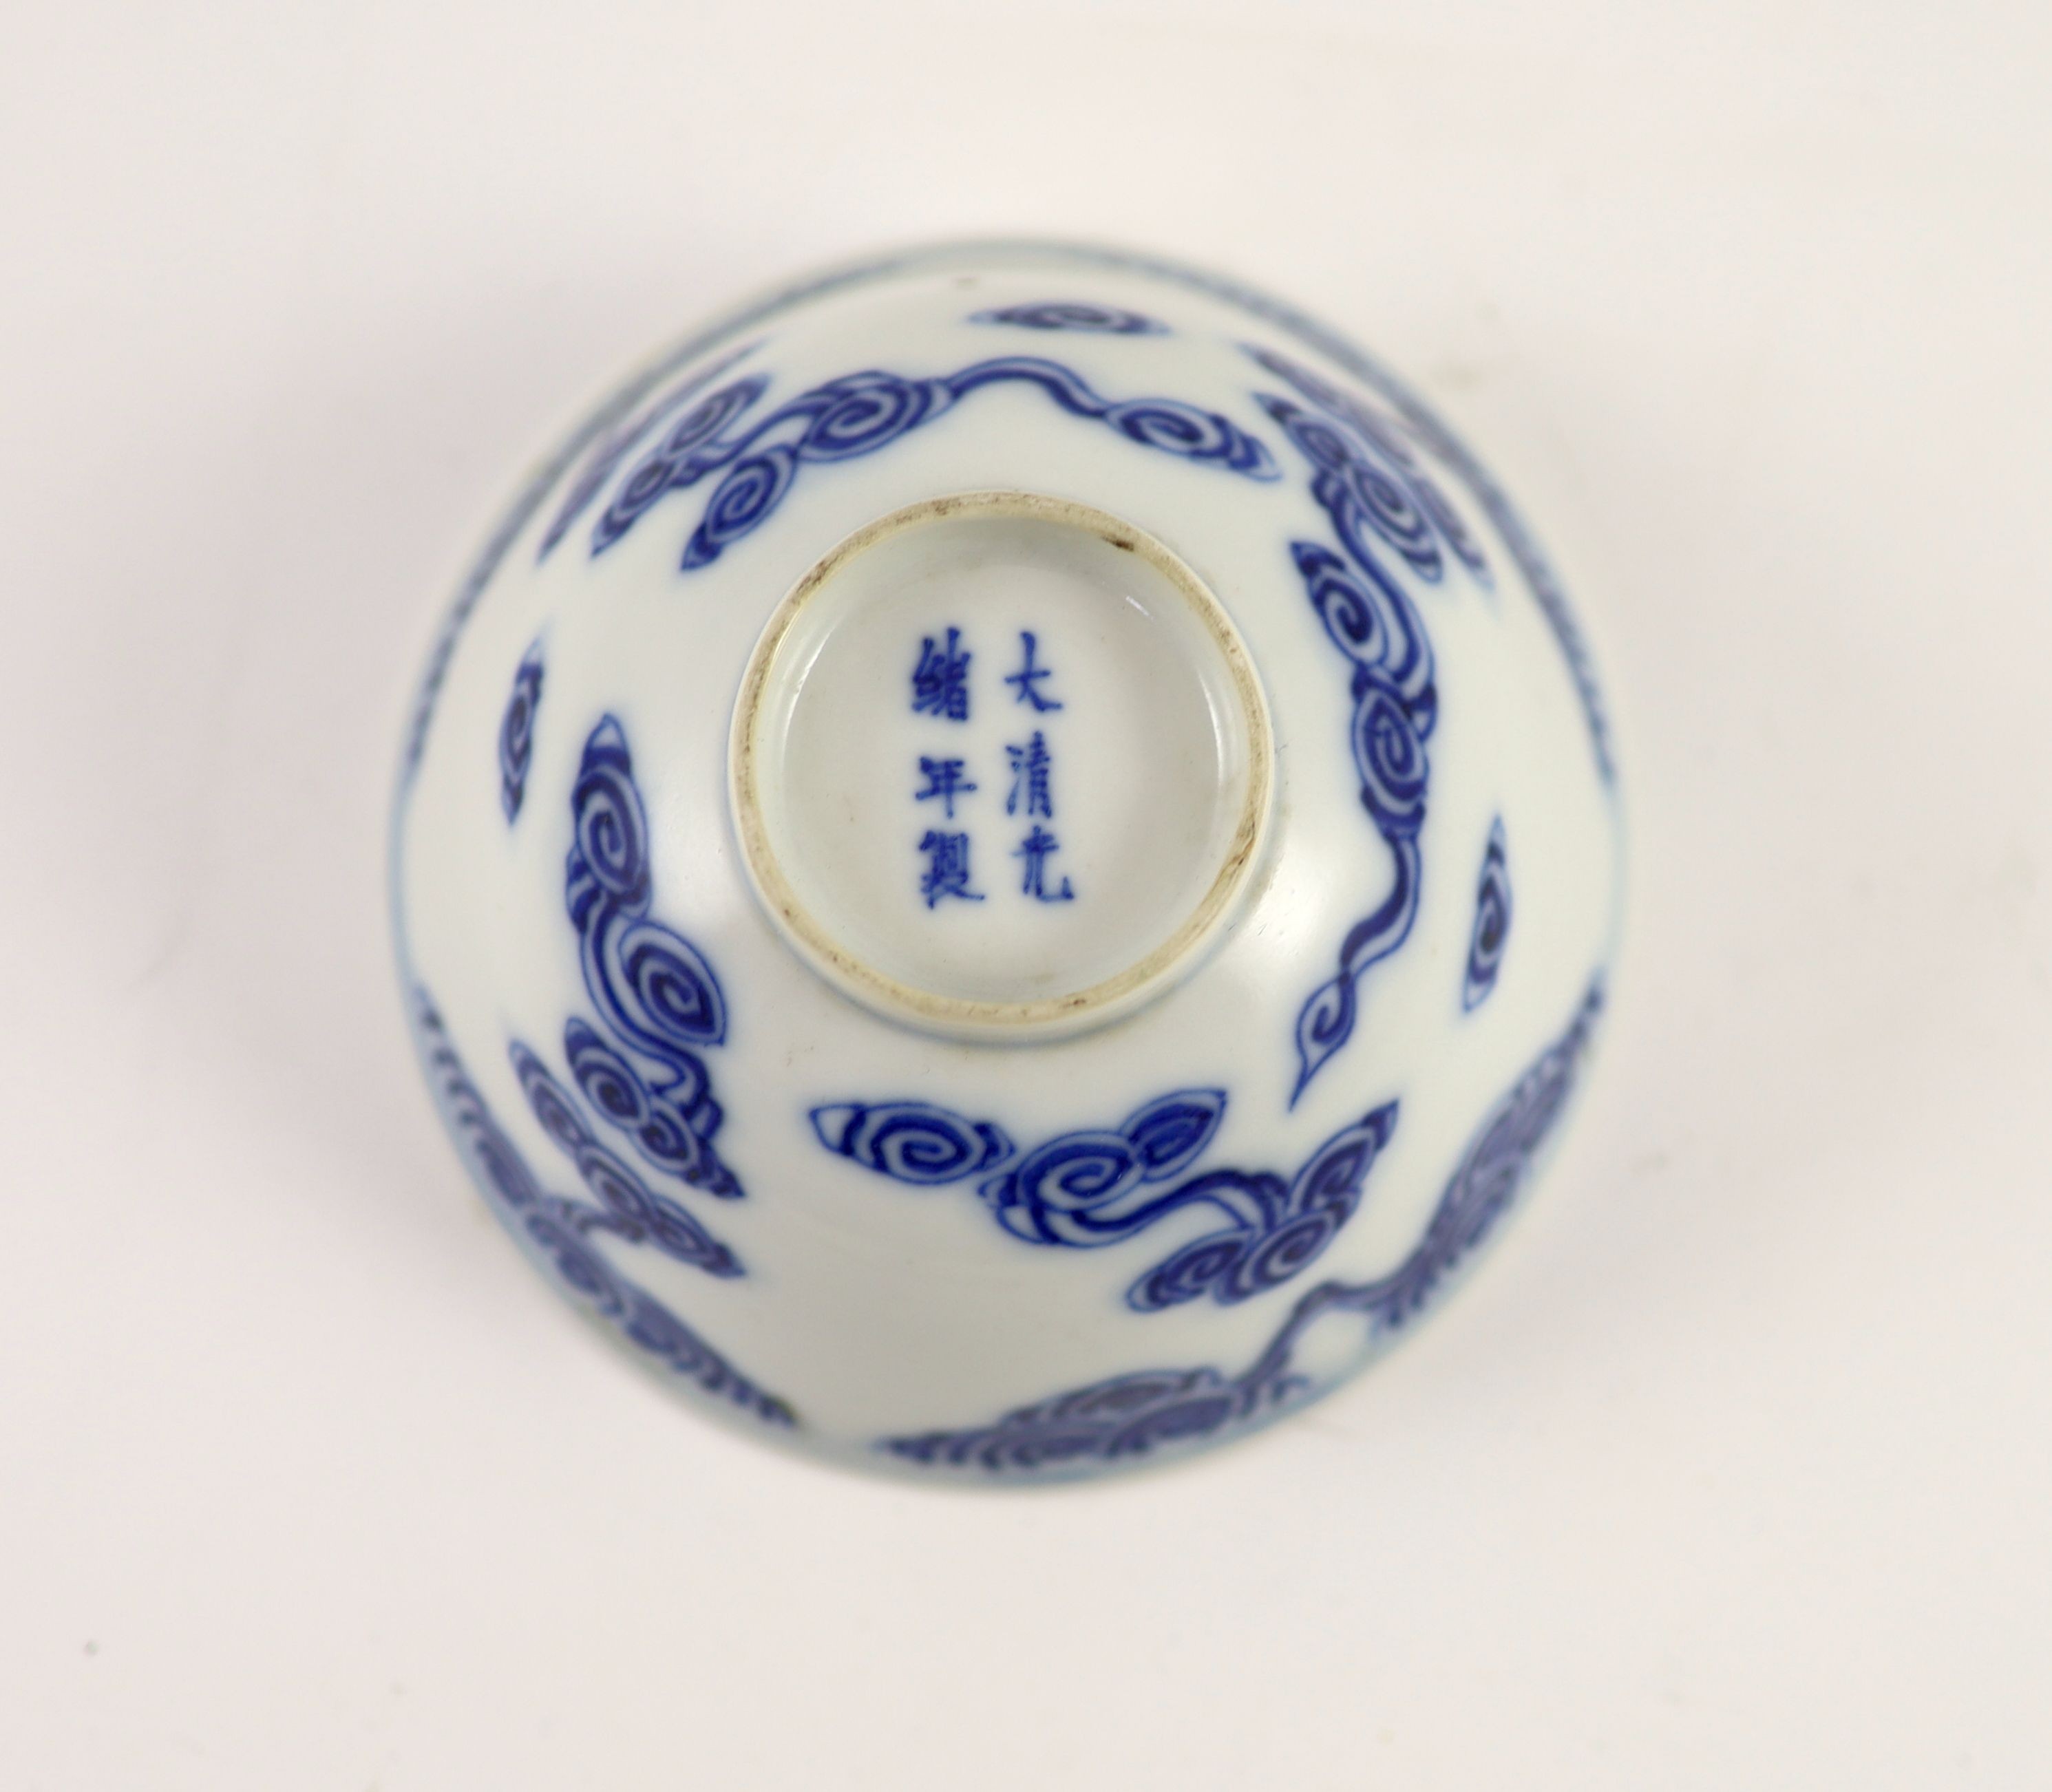 A Chinese blue and white bowl, Guangxu mark and period (1875-1908), 9.2 cm diameter